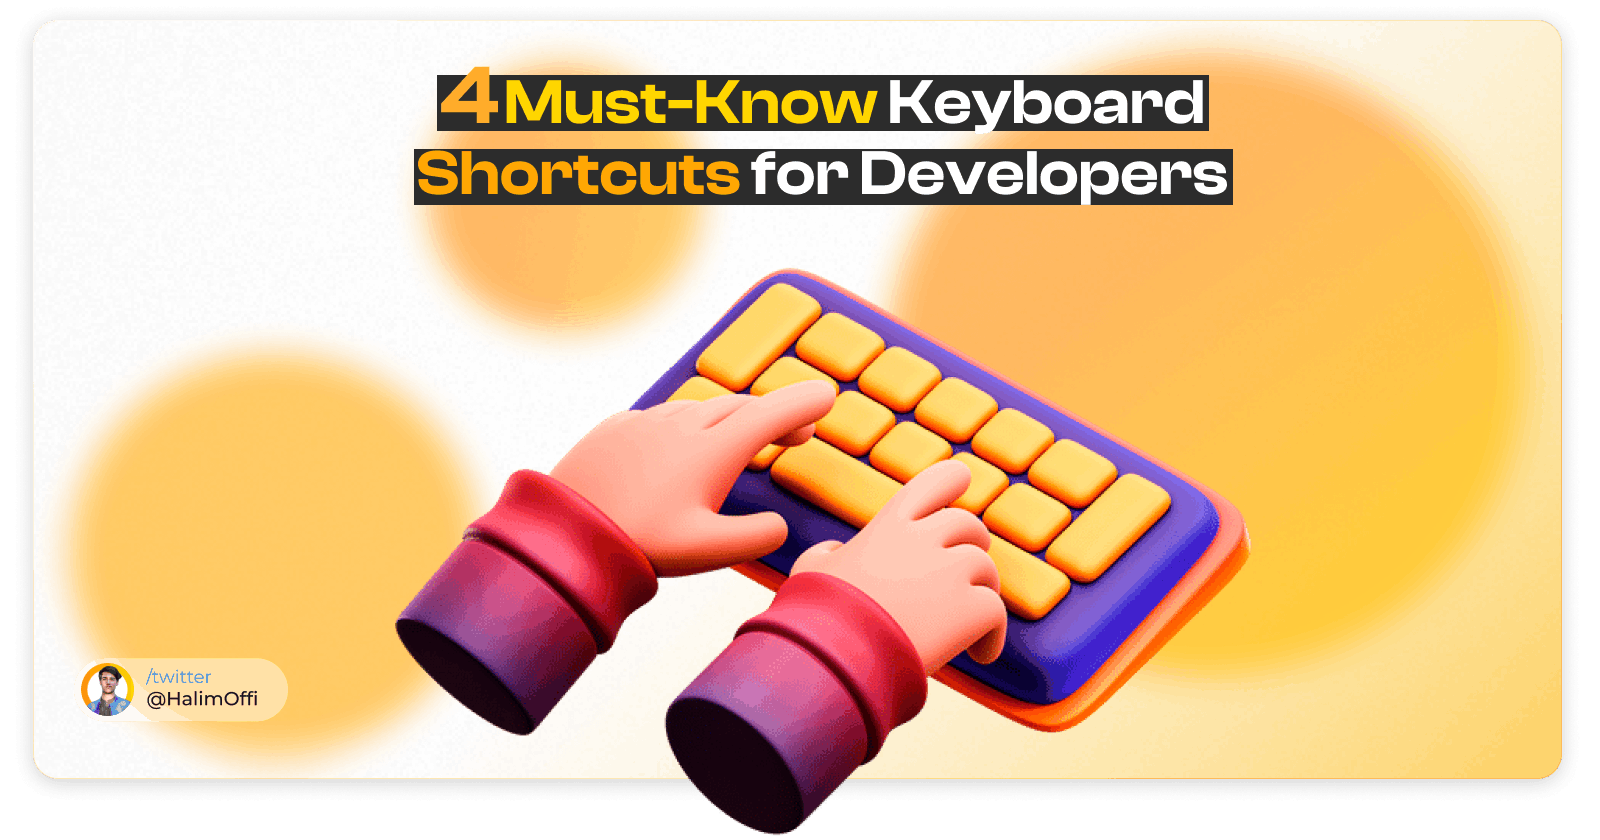 5 Keyboard Shortcuts Every Programmer Must Know